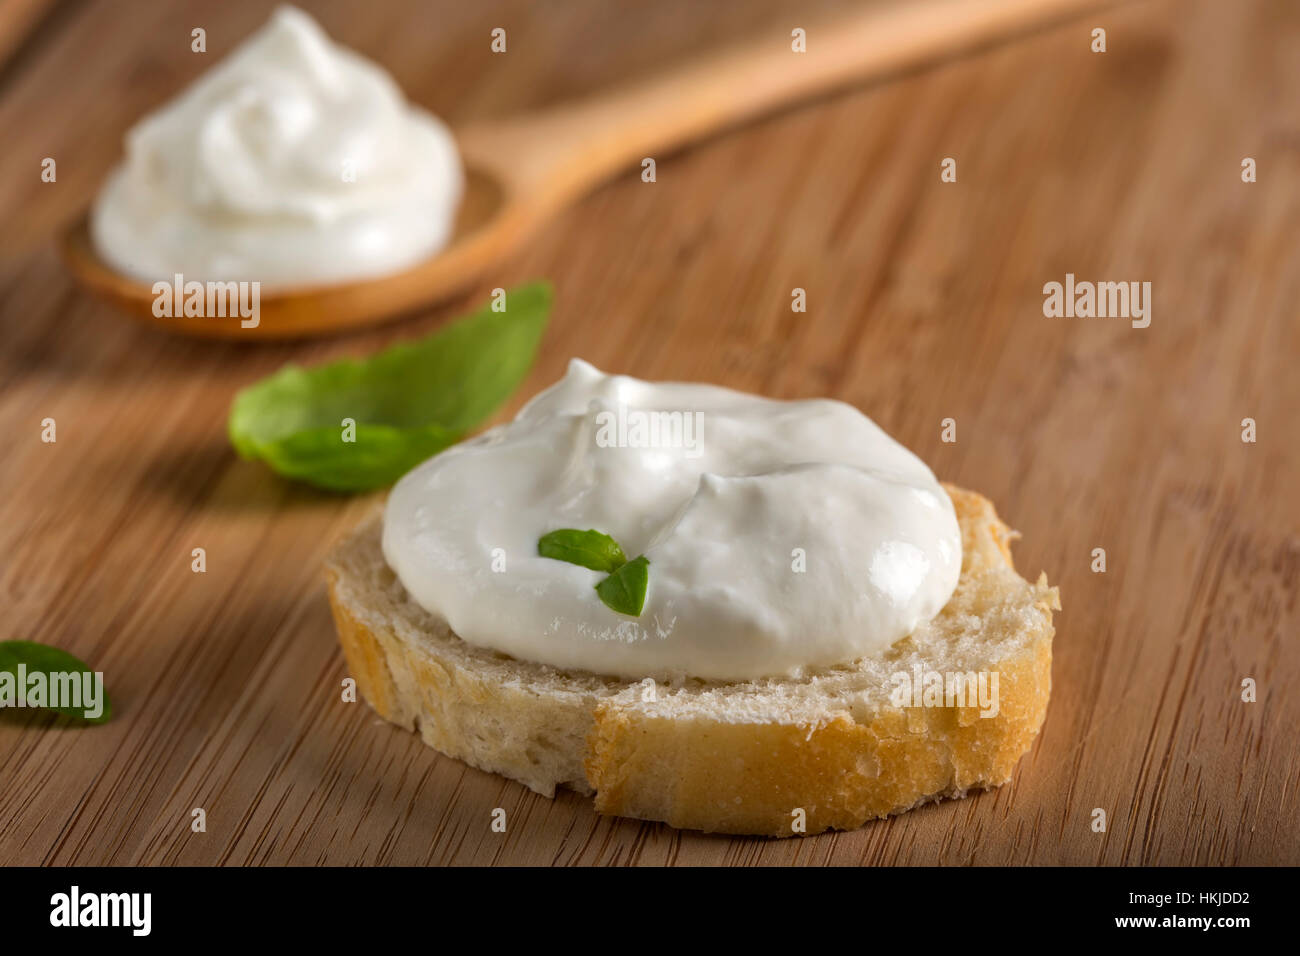 Cream-cheese and basil on french bread over wood background Stock Photo